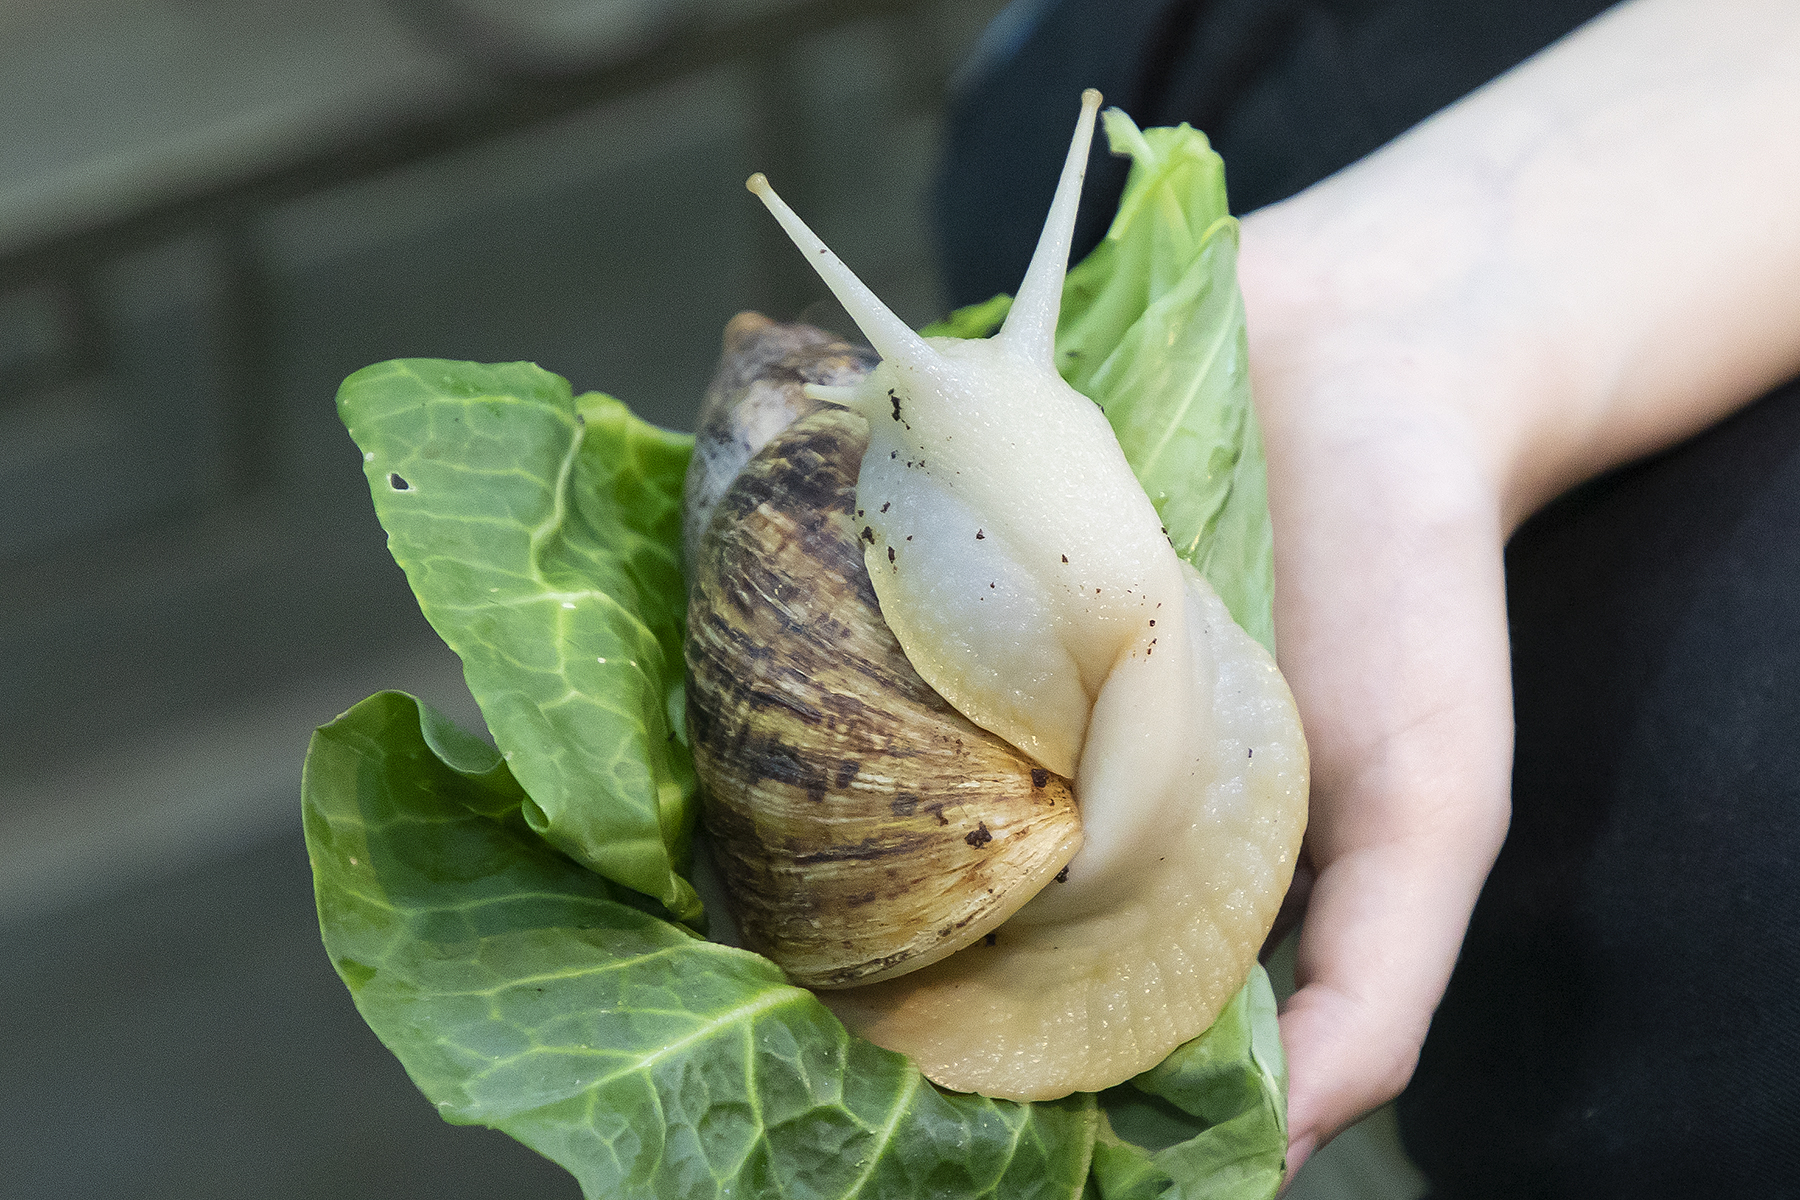 Hand holding an African Land Snail on top of a piece of lettuce at SEA LIFE Hunstanton Aquarium